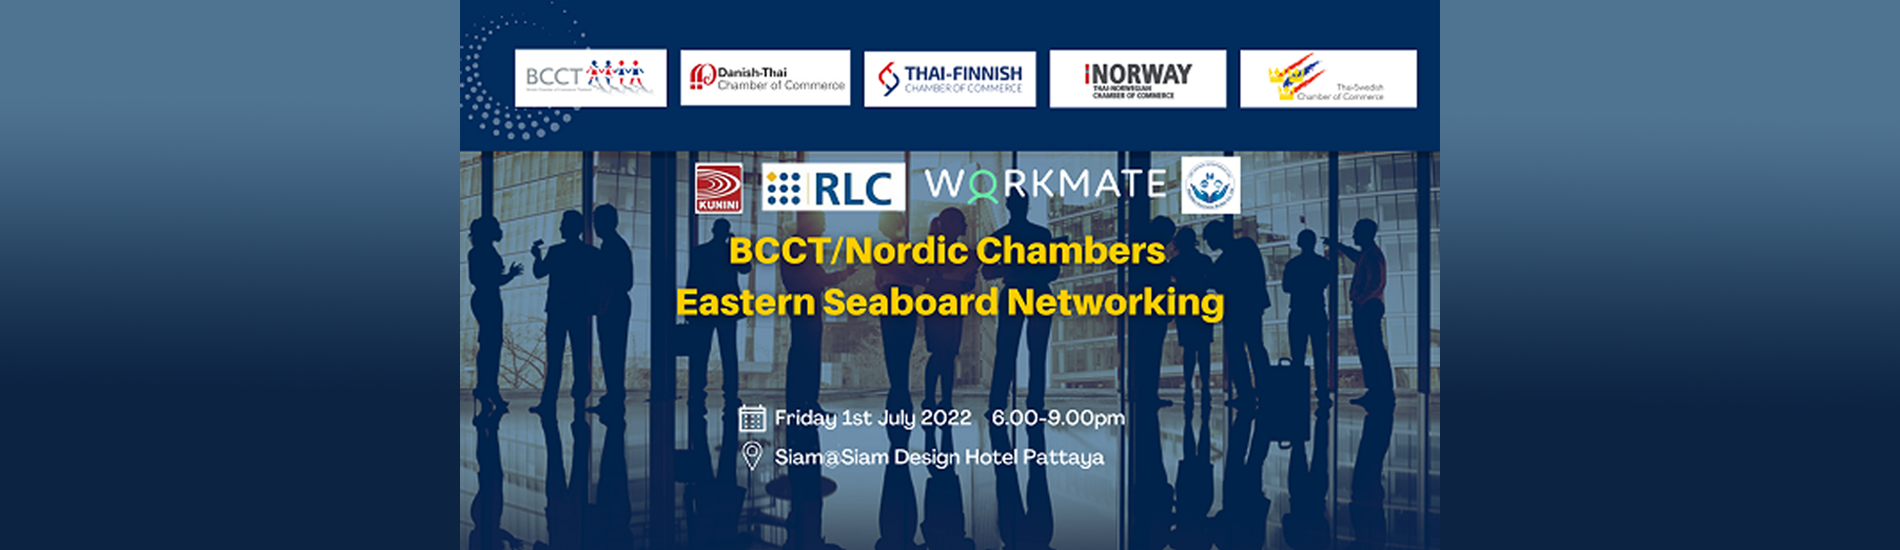 BCCT/Nordic Chambers Eastern Seaboard Business Networking